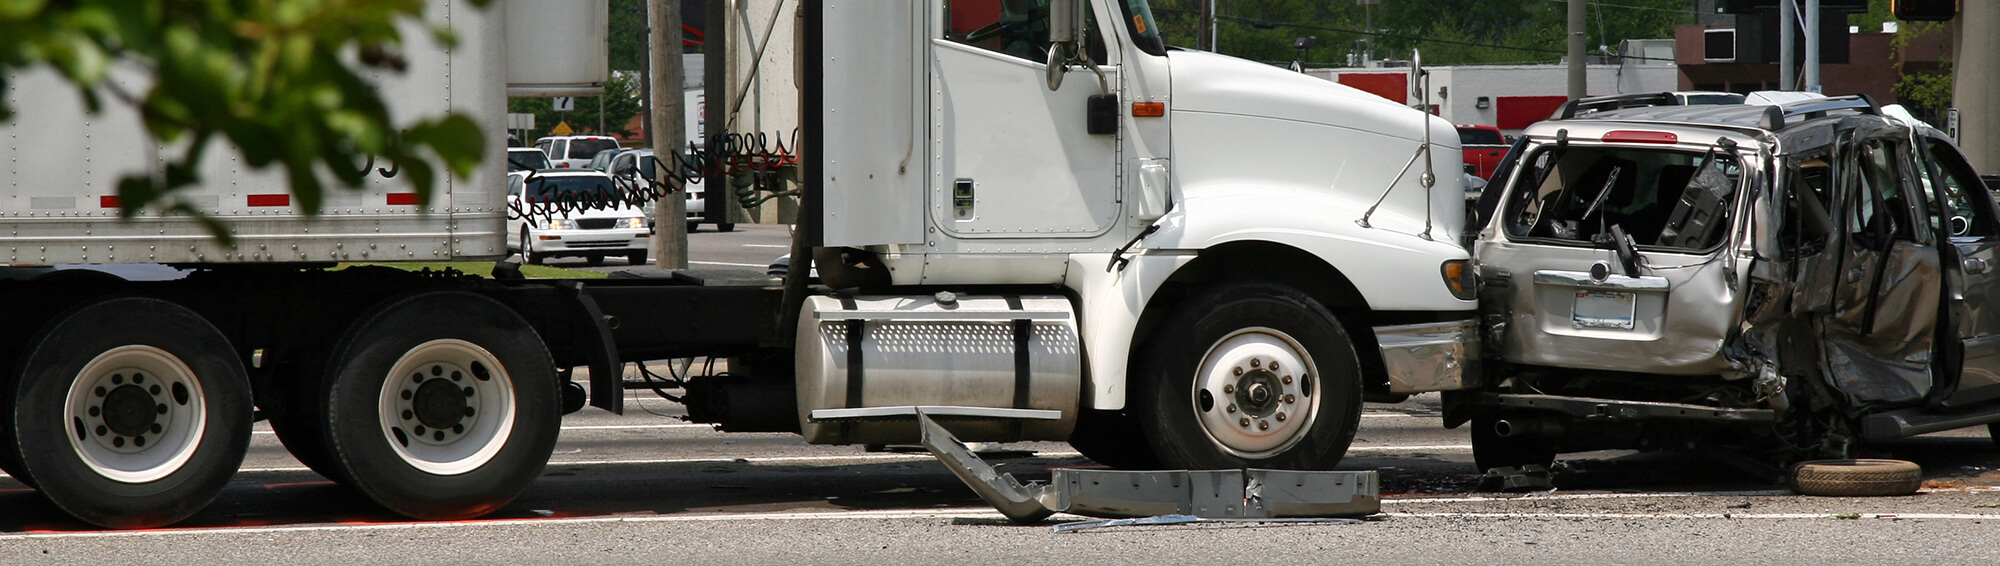 Who can be held responsible for truck accidents?